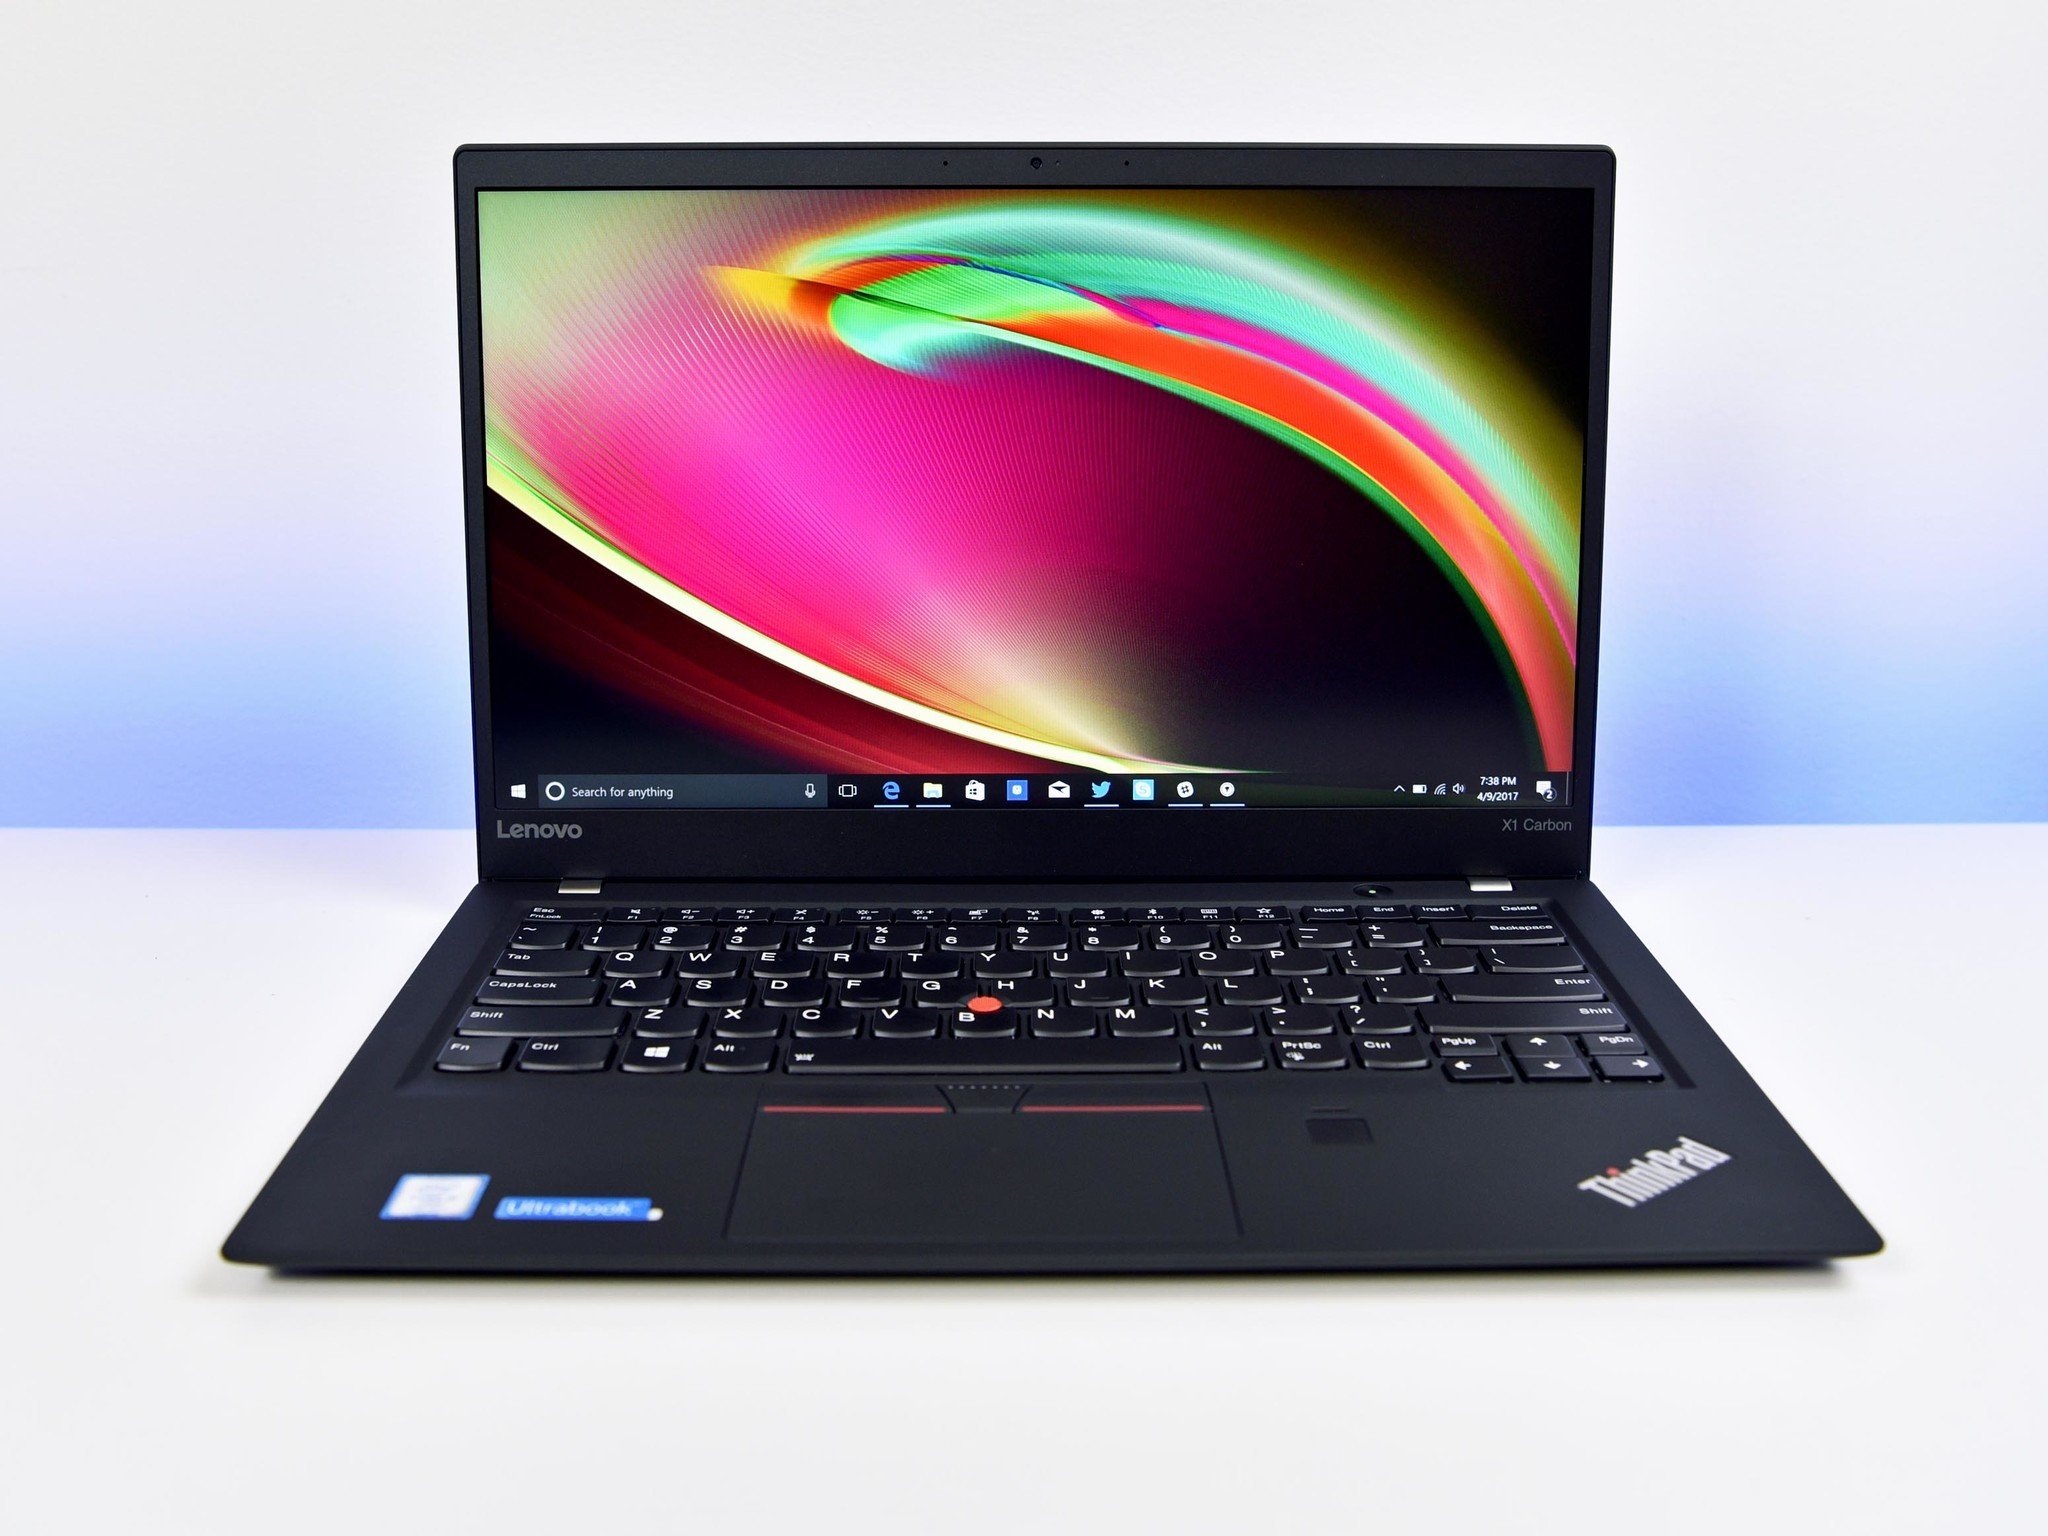 Lenovo Thinkpad X1 Carbon 2017 Review An Iconic Business Laptop